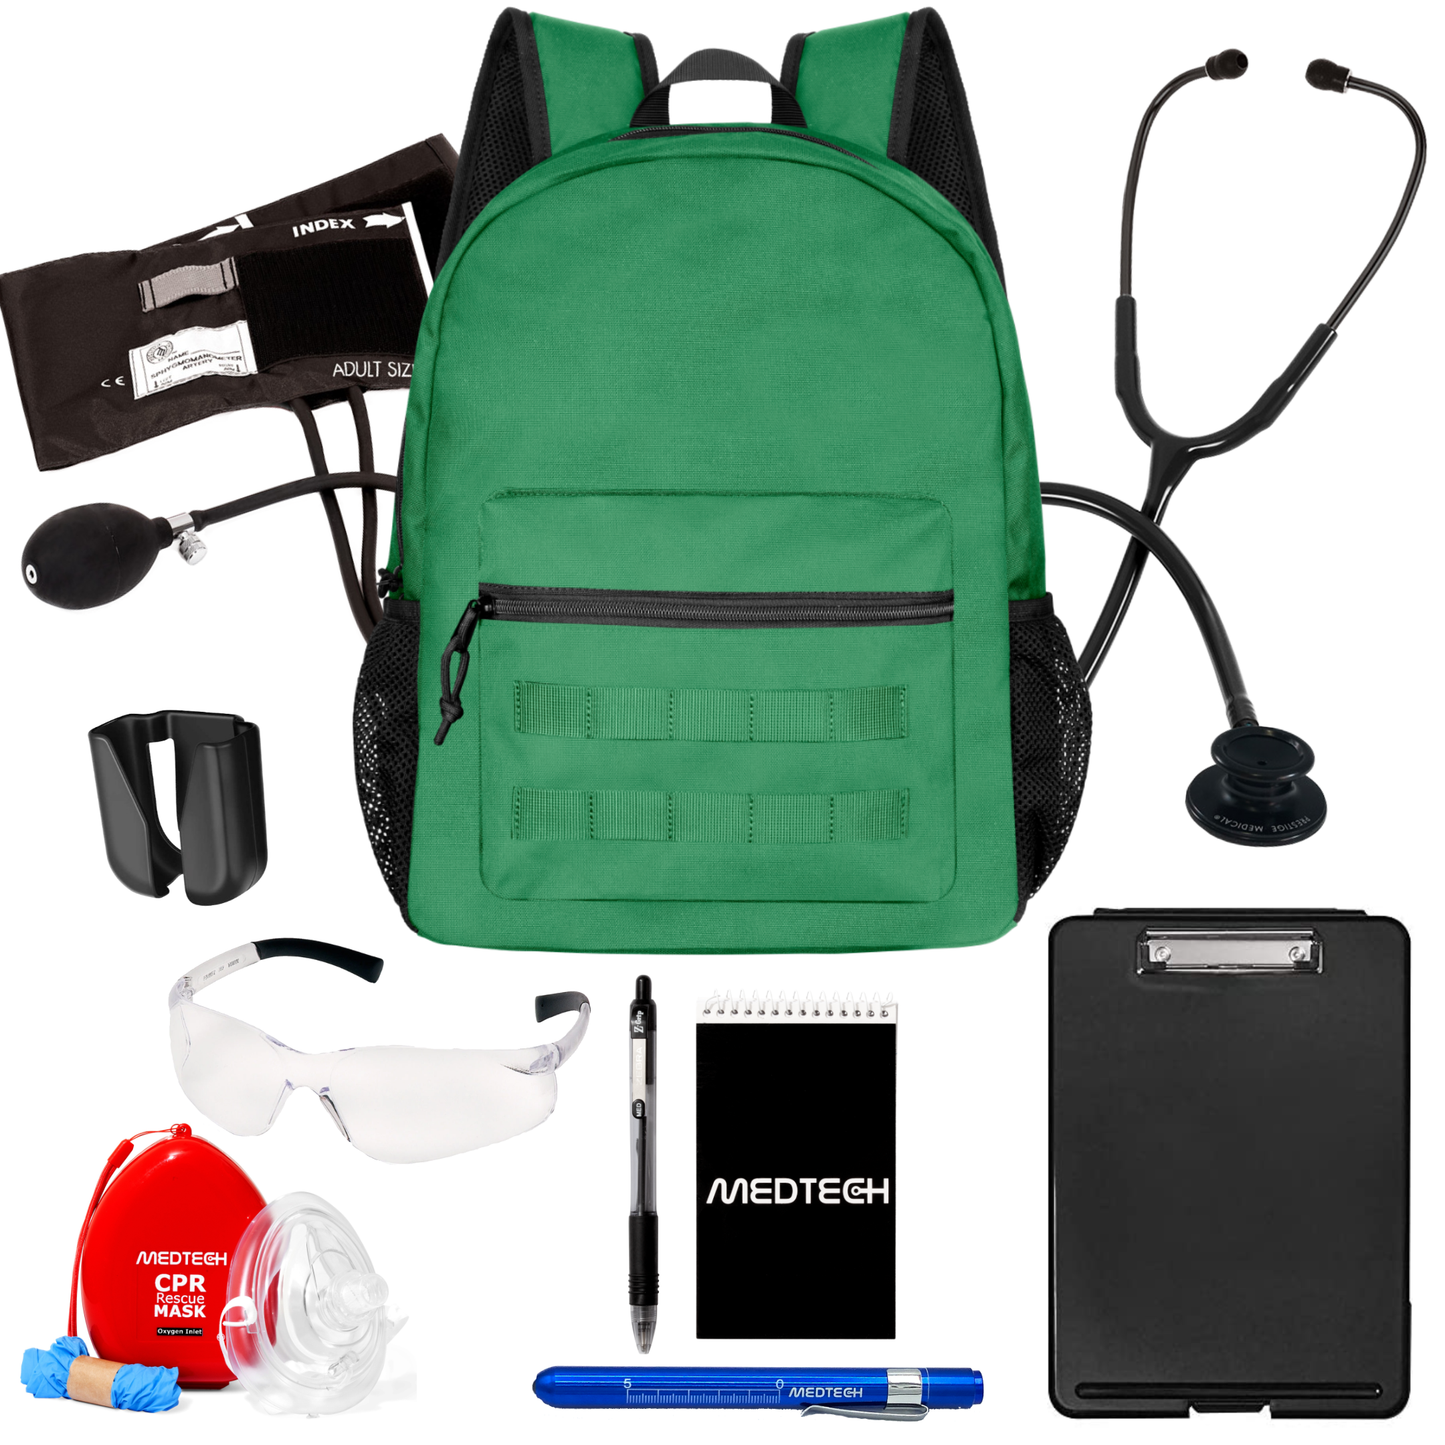 North Seattle College Custom Clinical Kit